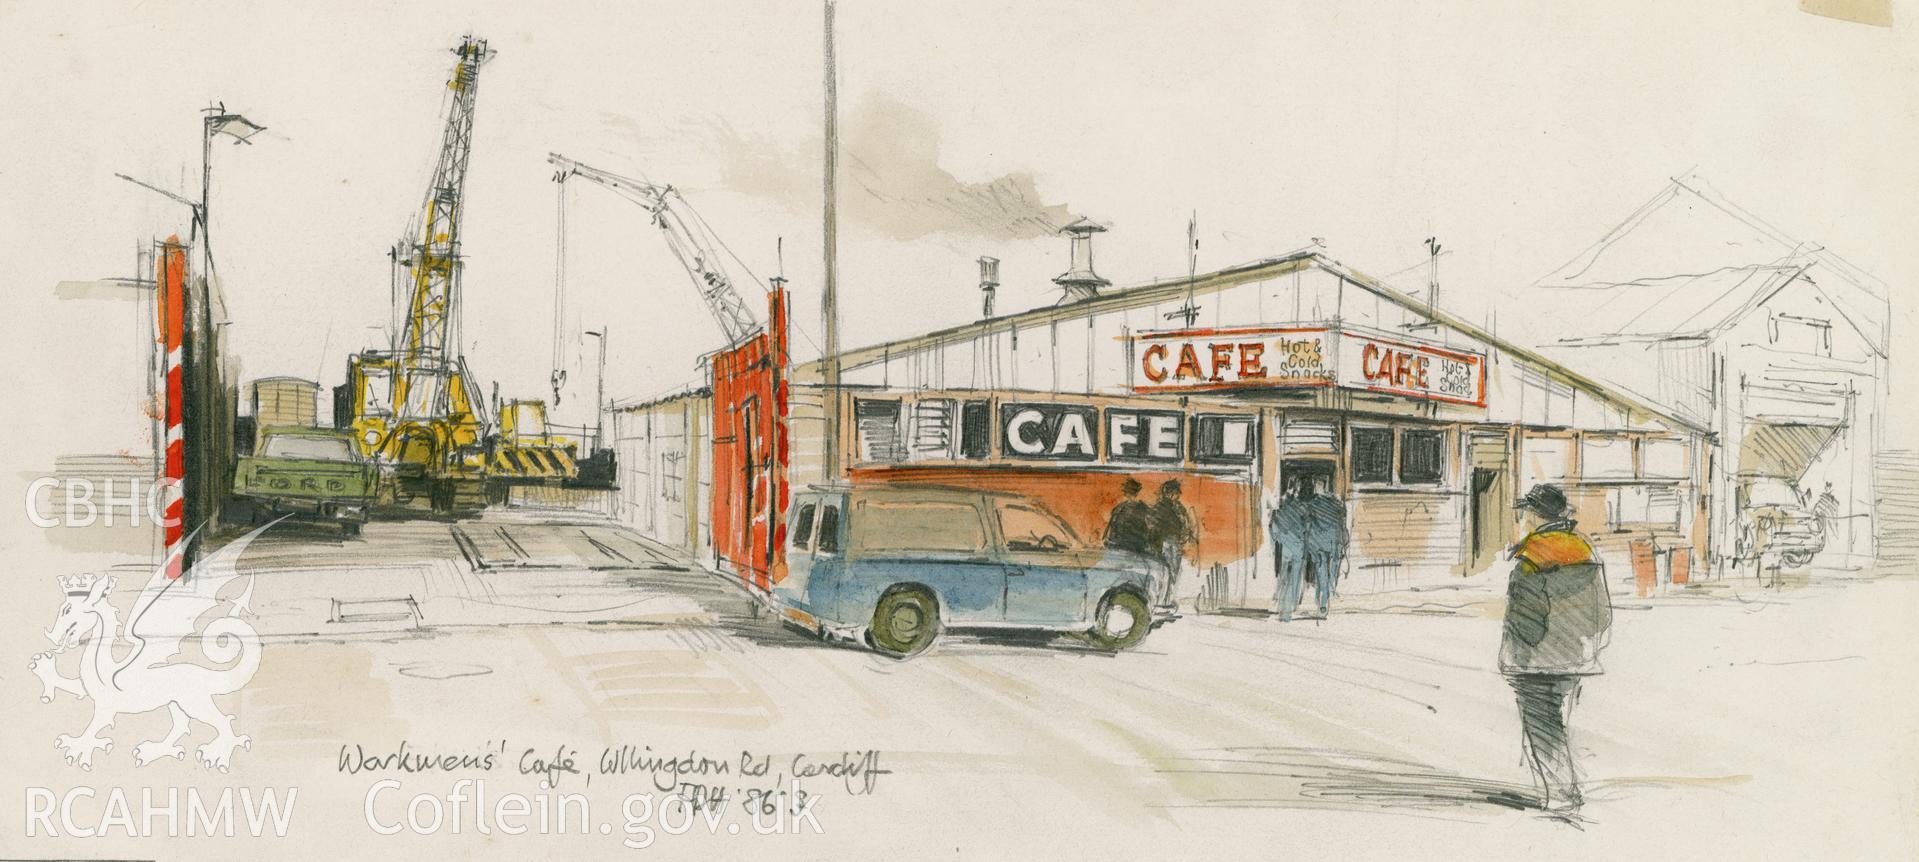 Workman's Cafe, Cardiff: (pencil and watercolour) drawing.